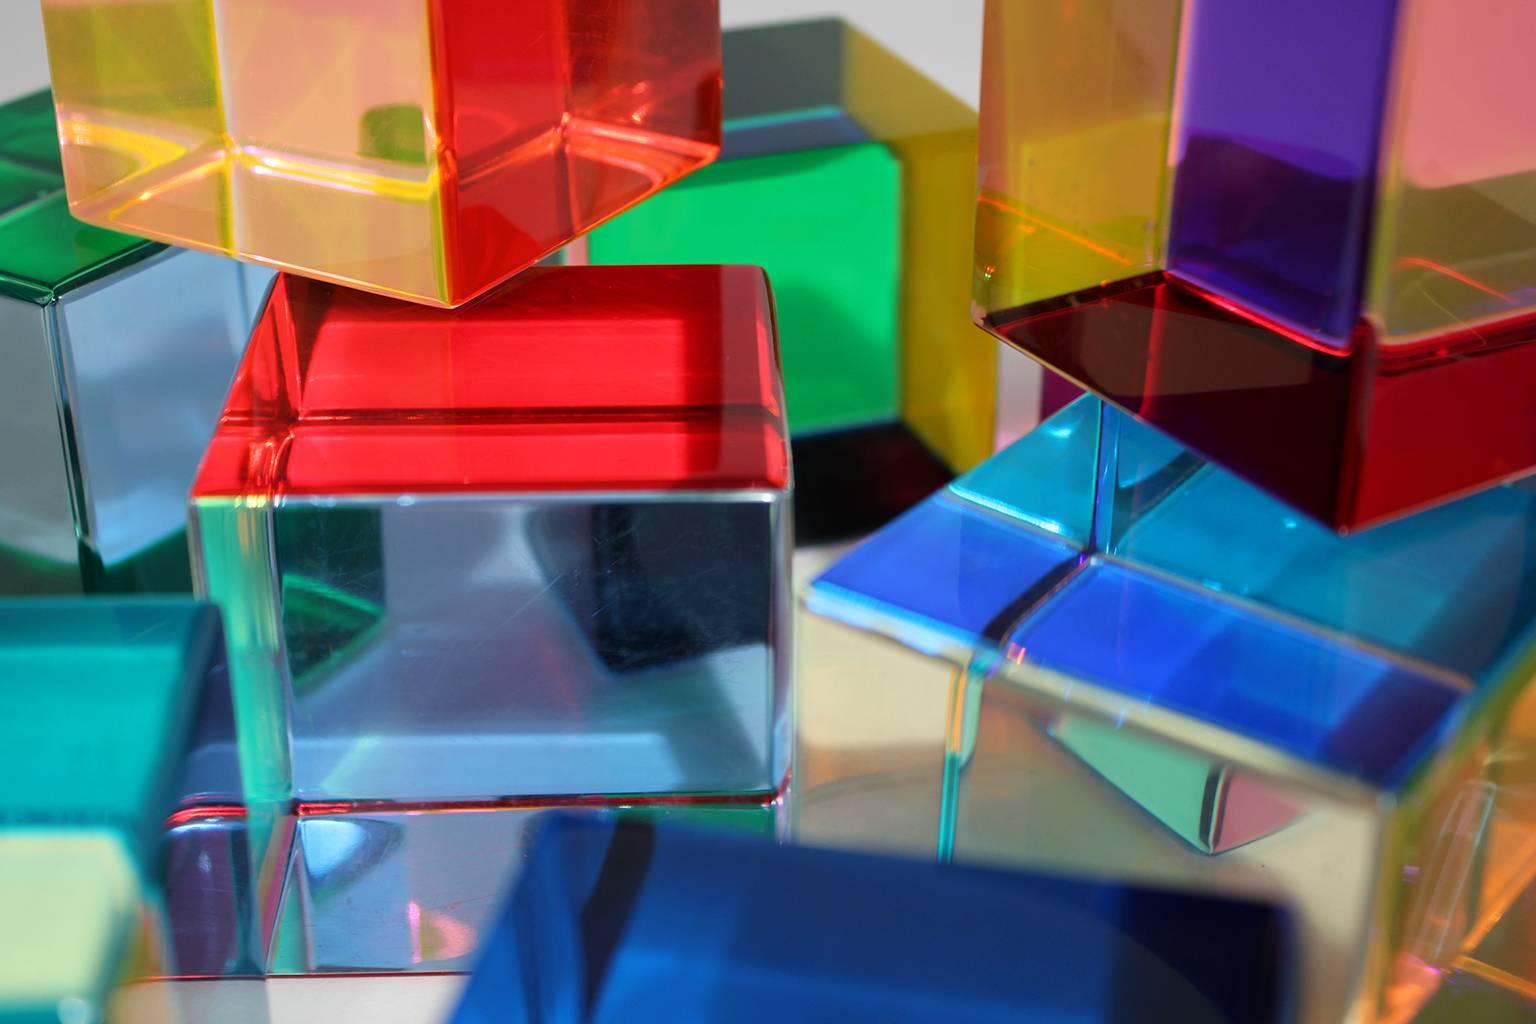 1990 Vasa Mihich Collection of Ten Acrylic Sculpture Cubes Edition of 50 1